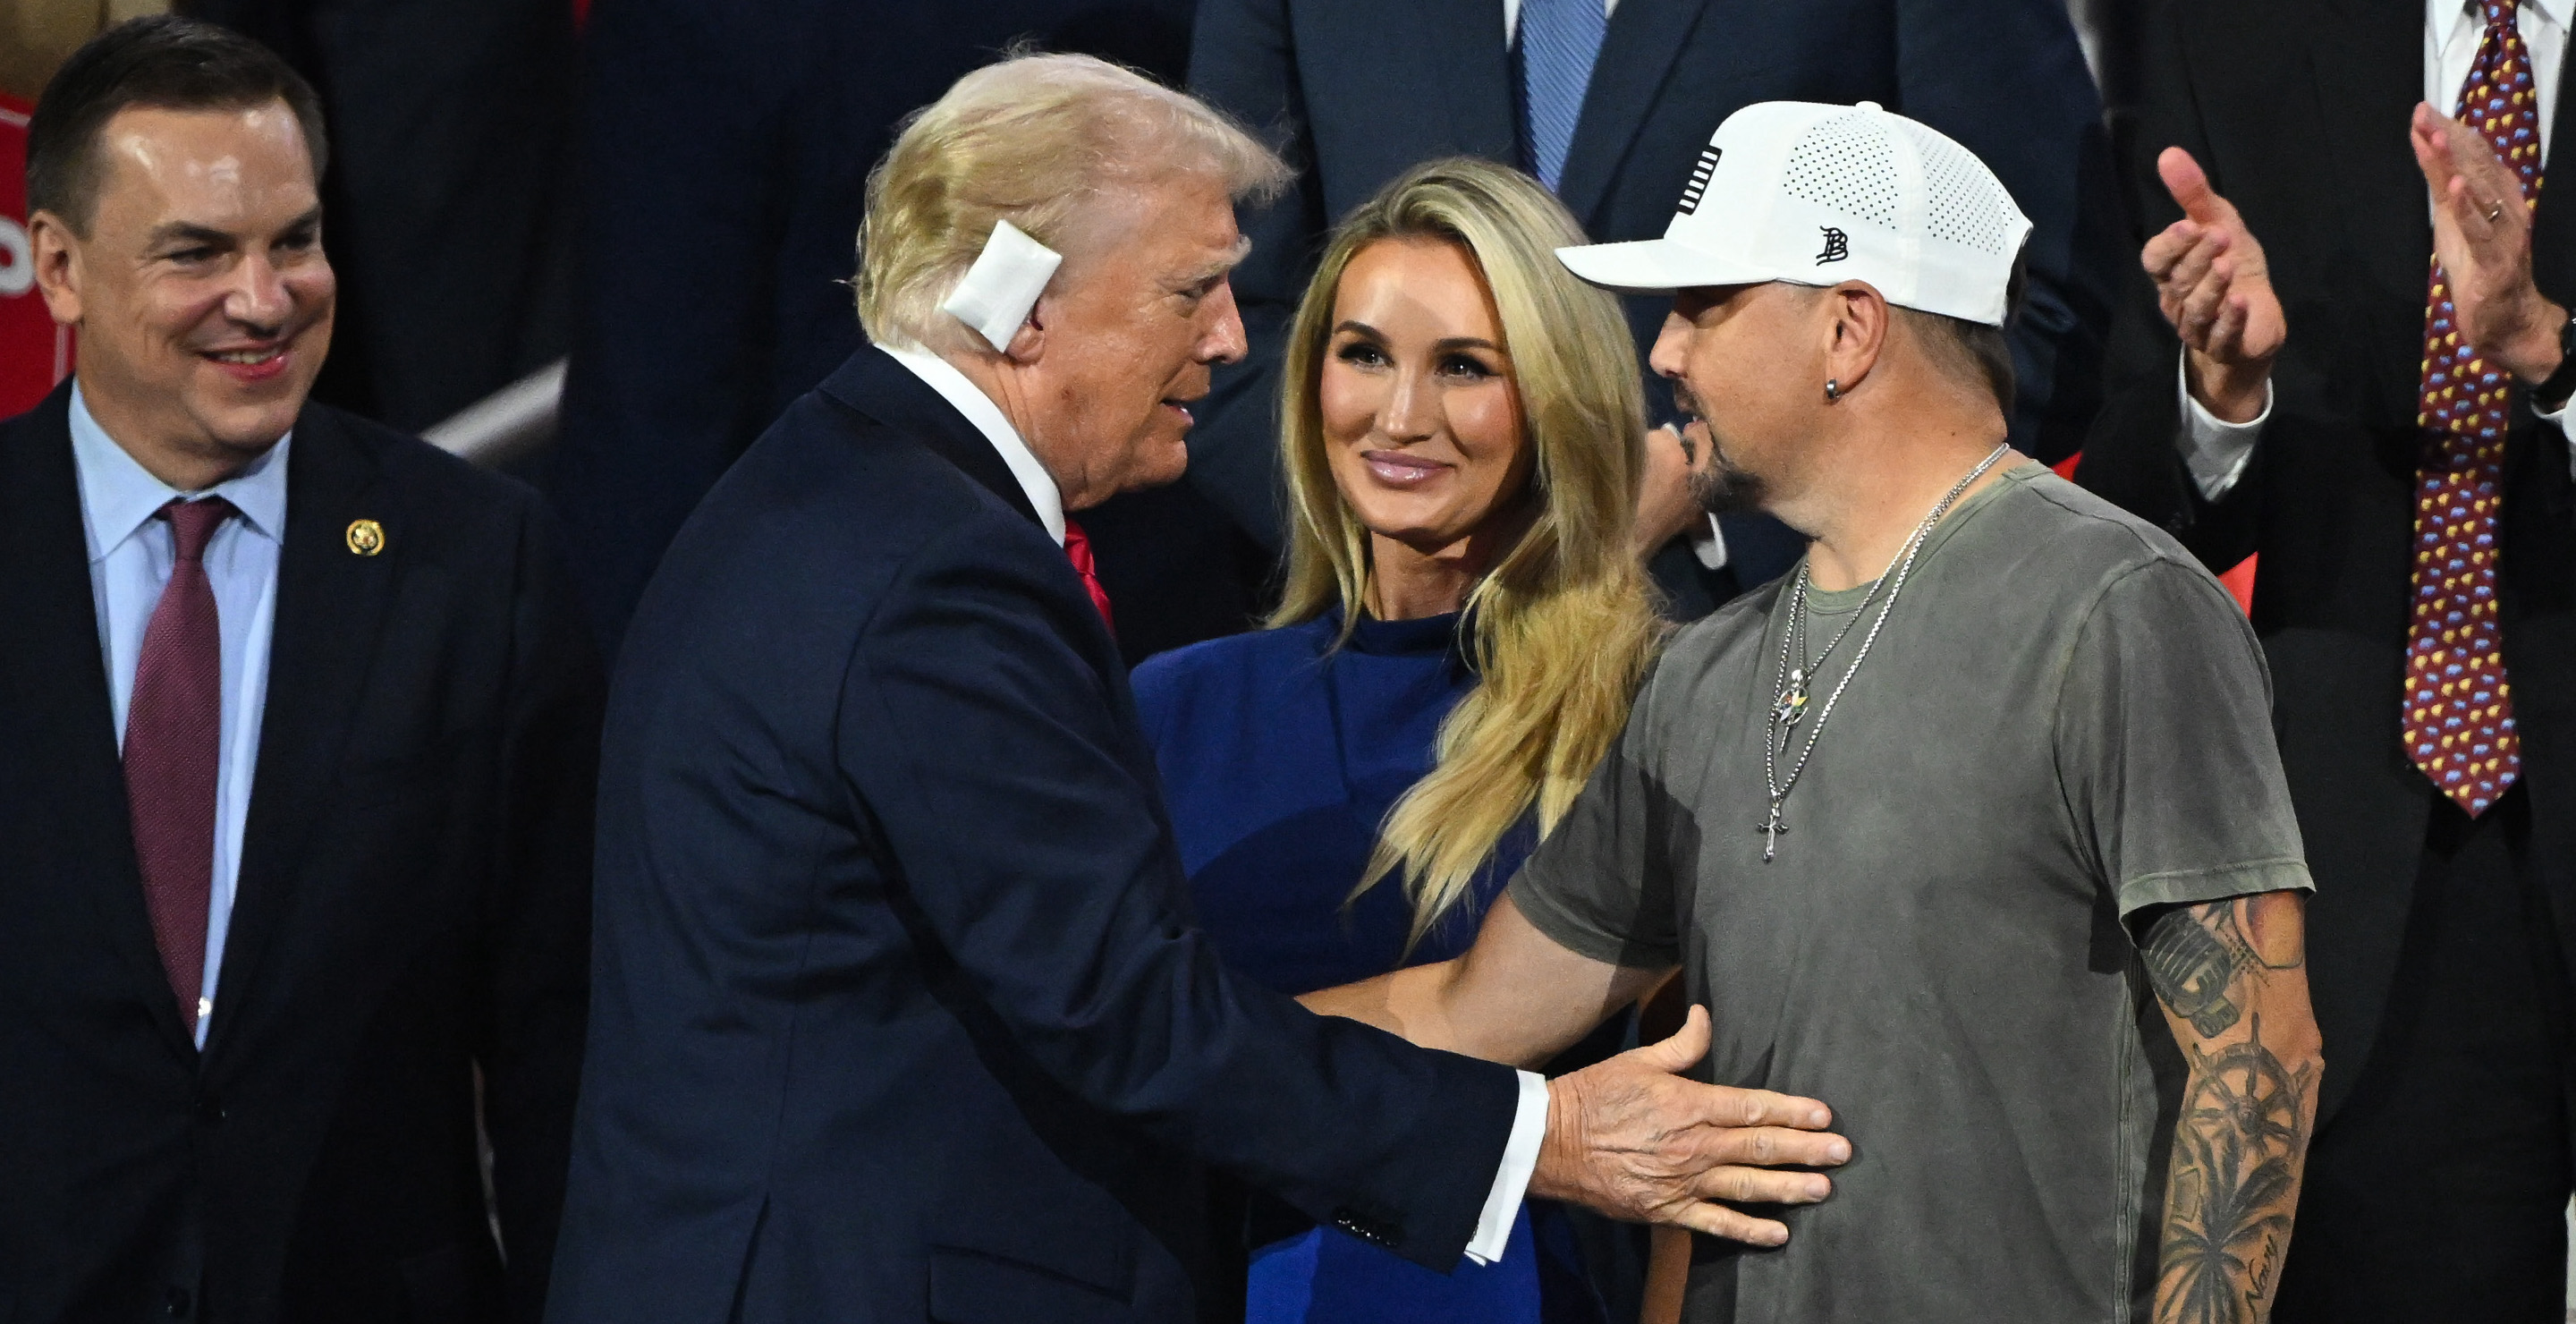 Jason Aldean Says Country Artists Thank Him For Speaking Out for Conservatives